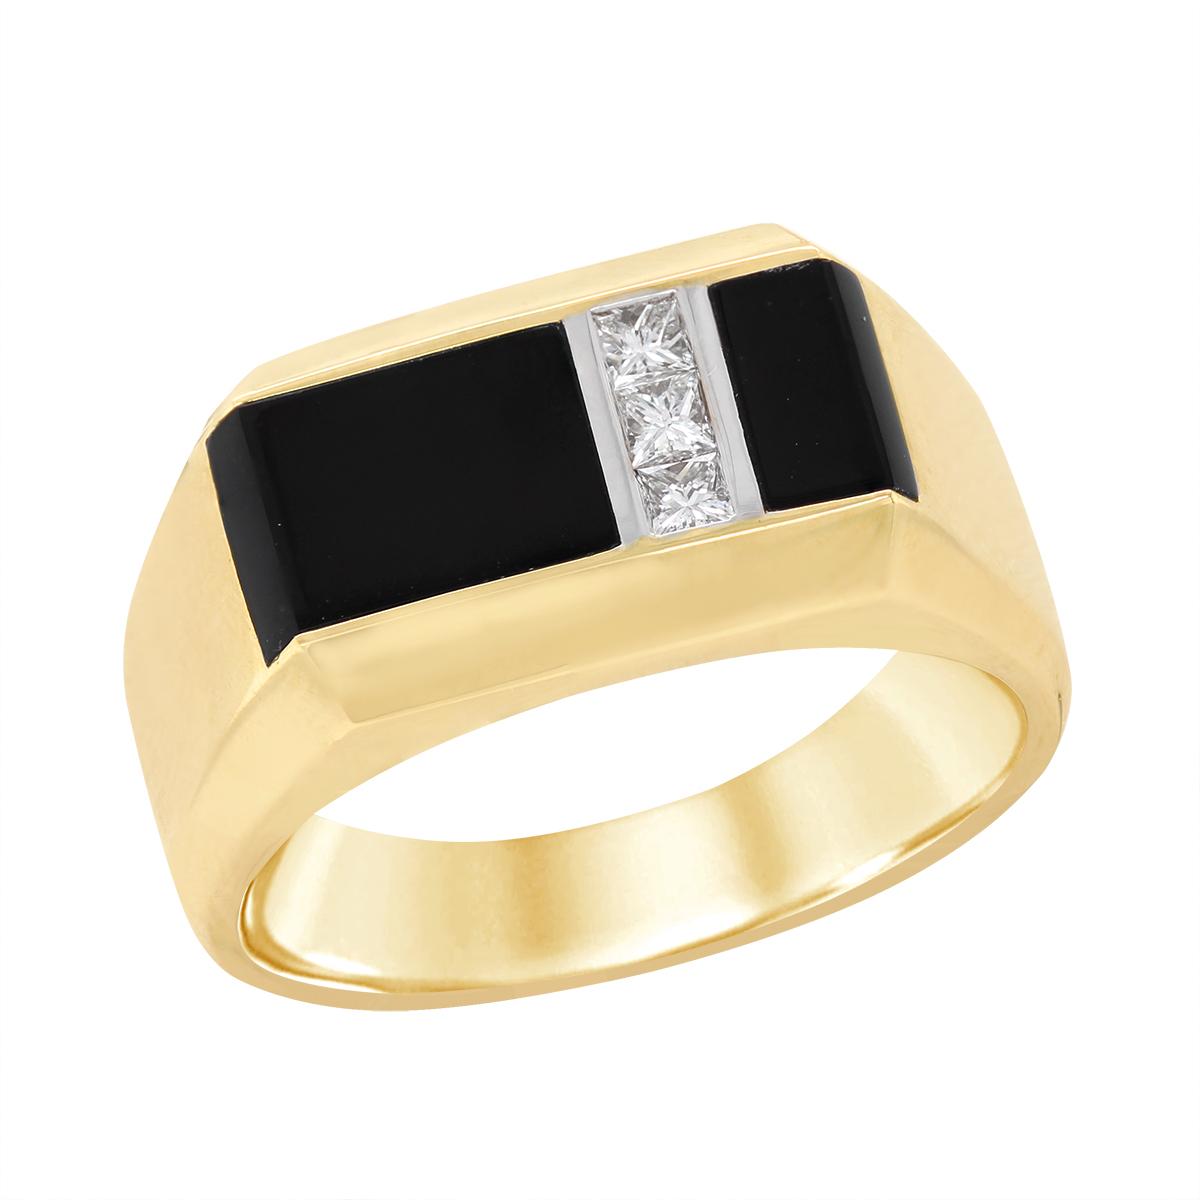 MEN'S TWO-TONE GOLD RING WITH BLACK AGATE AND 3 PRINCESS CUT DIAMONDS, .22  CT TW